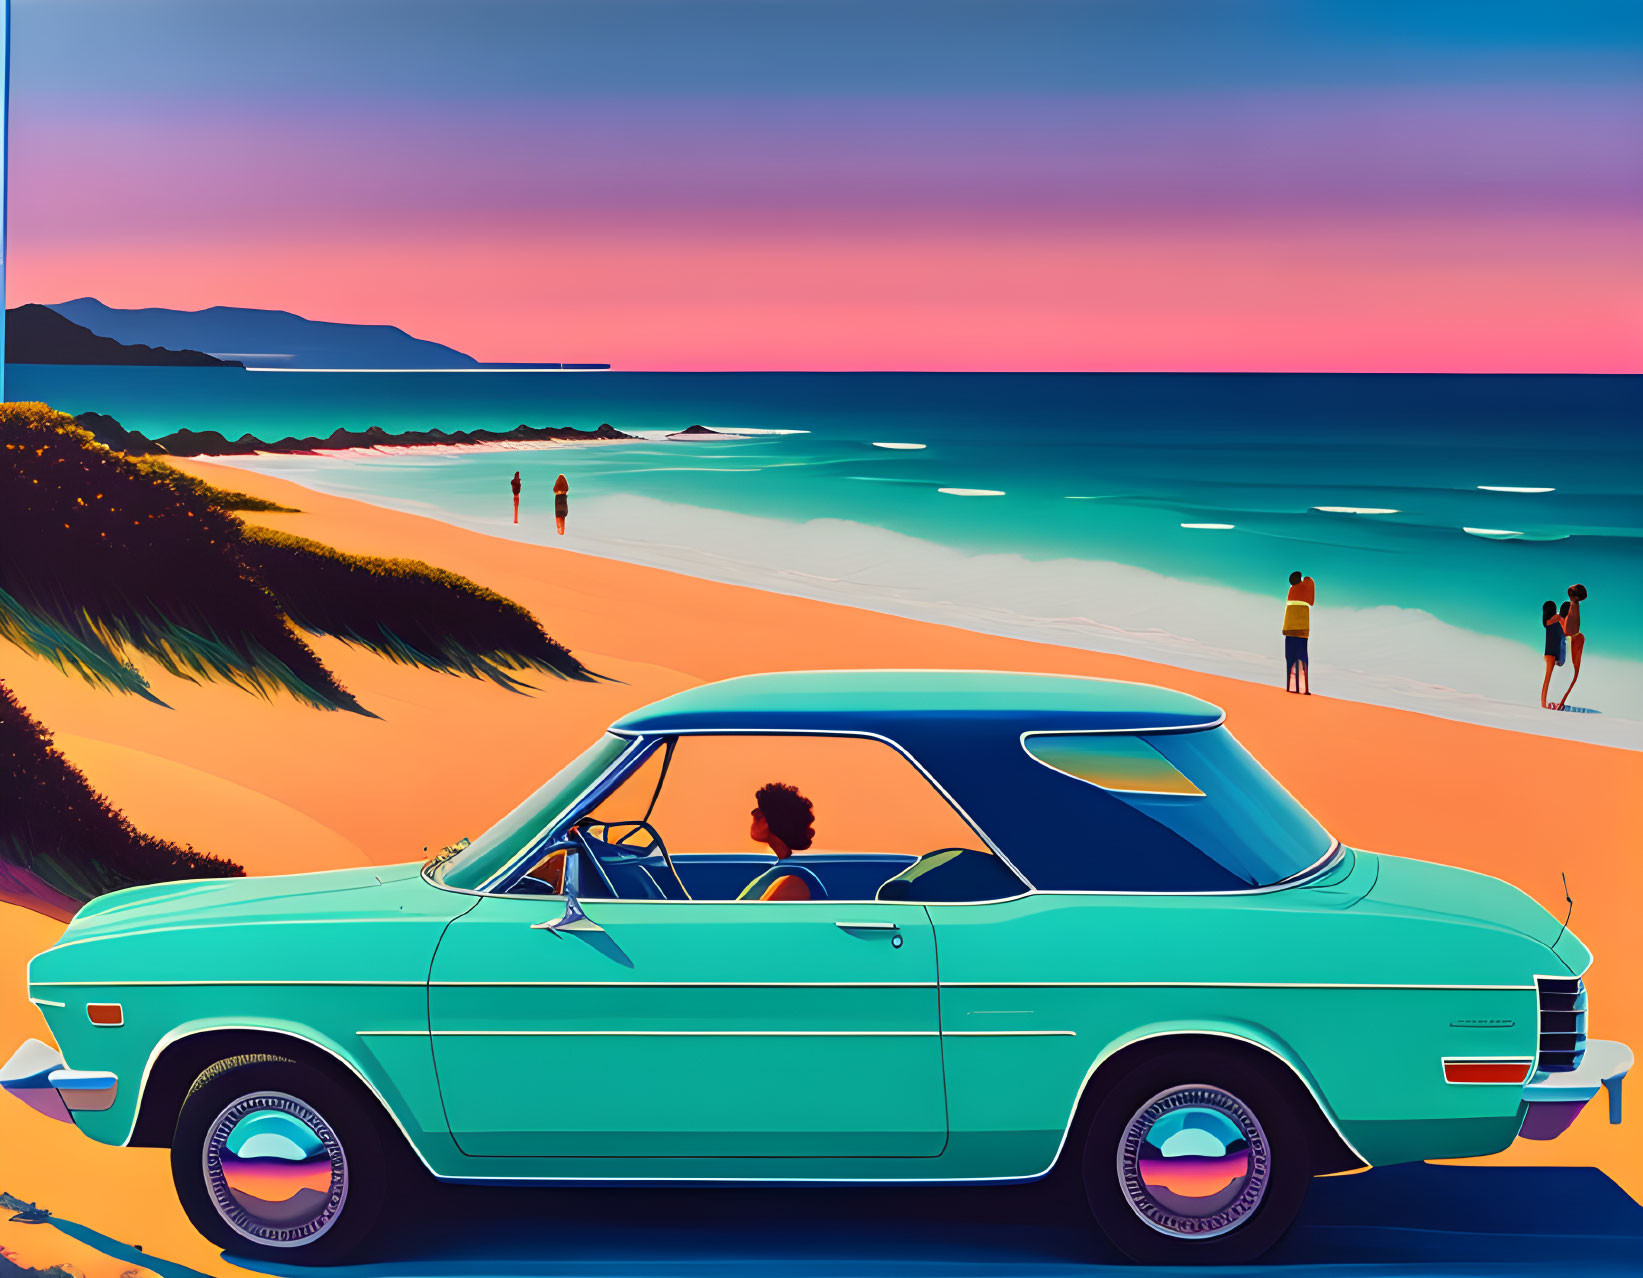 Classic Car Parked Near Beach with Colorful Sky and People Walking